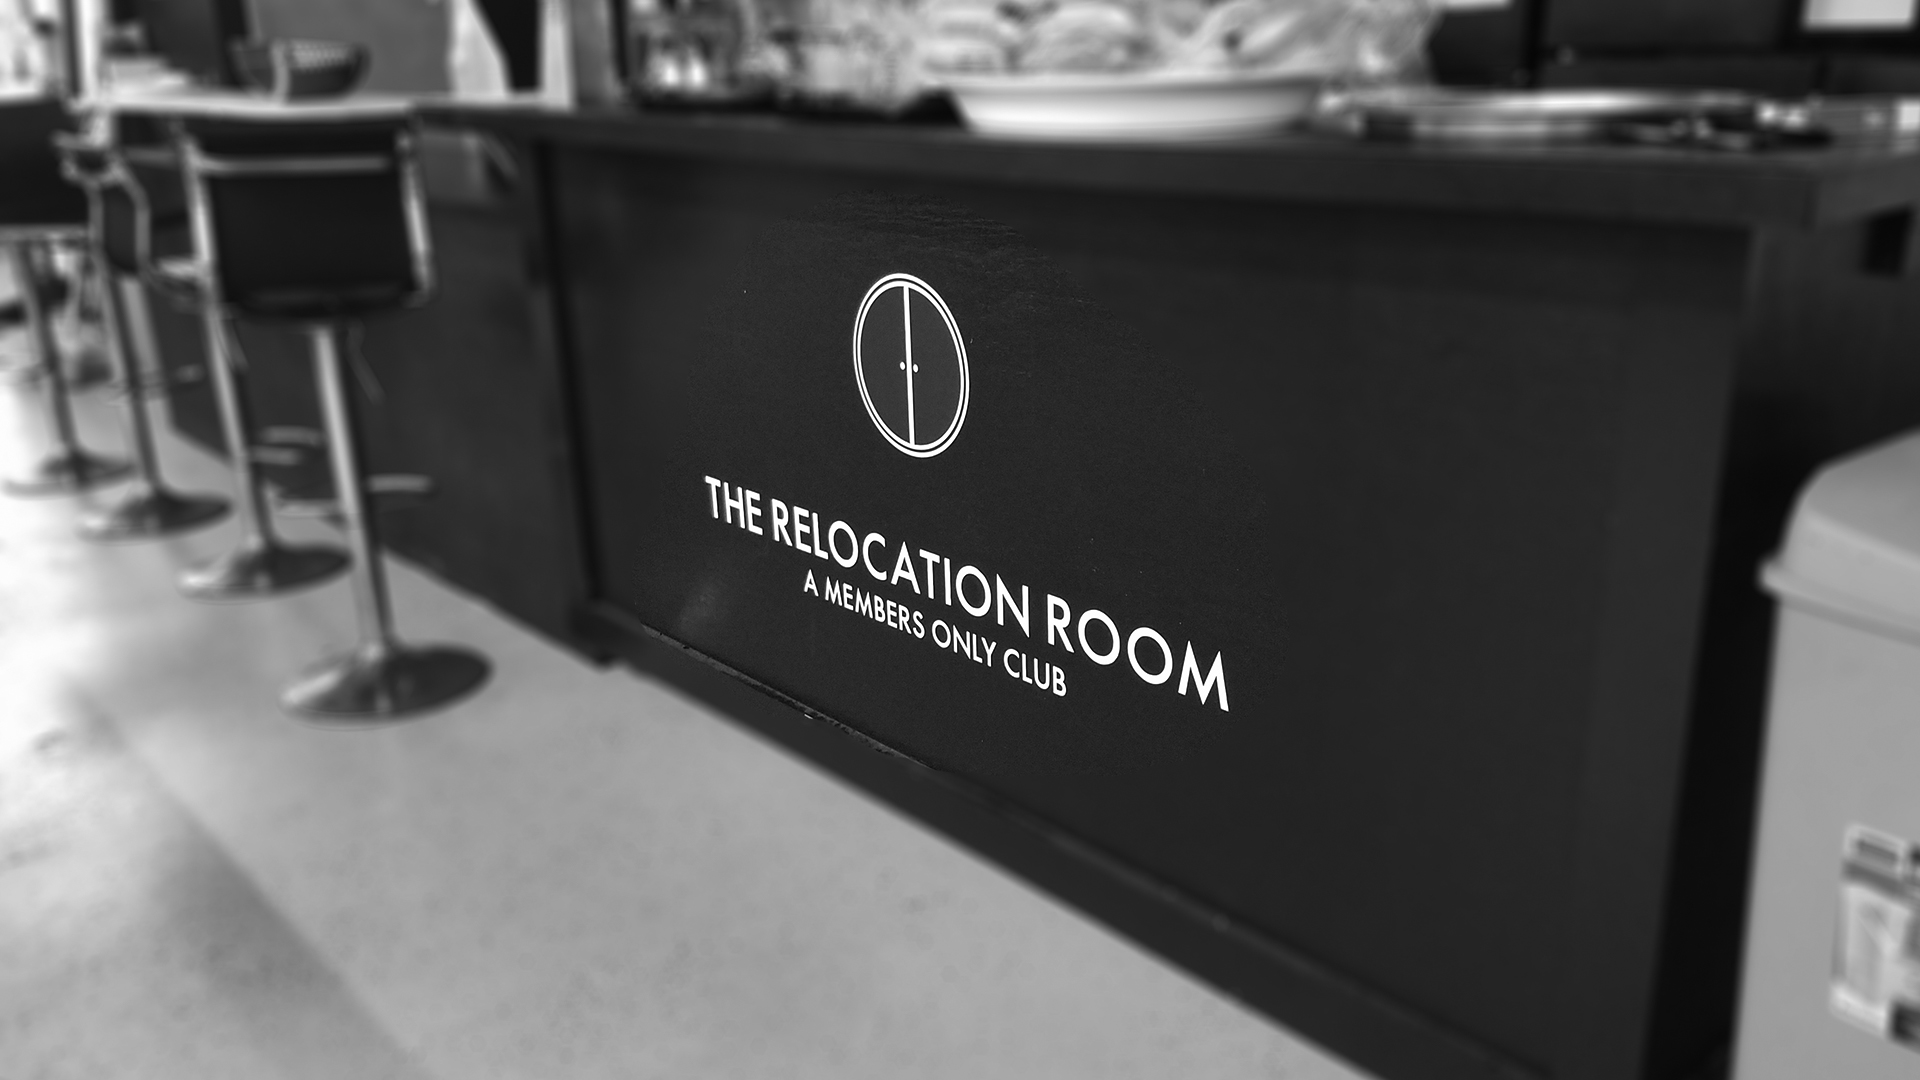 The Relocation Room Private Club